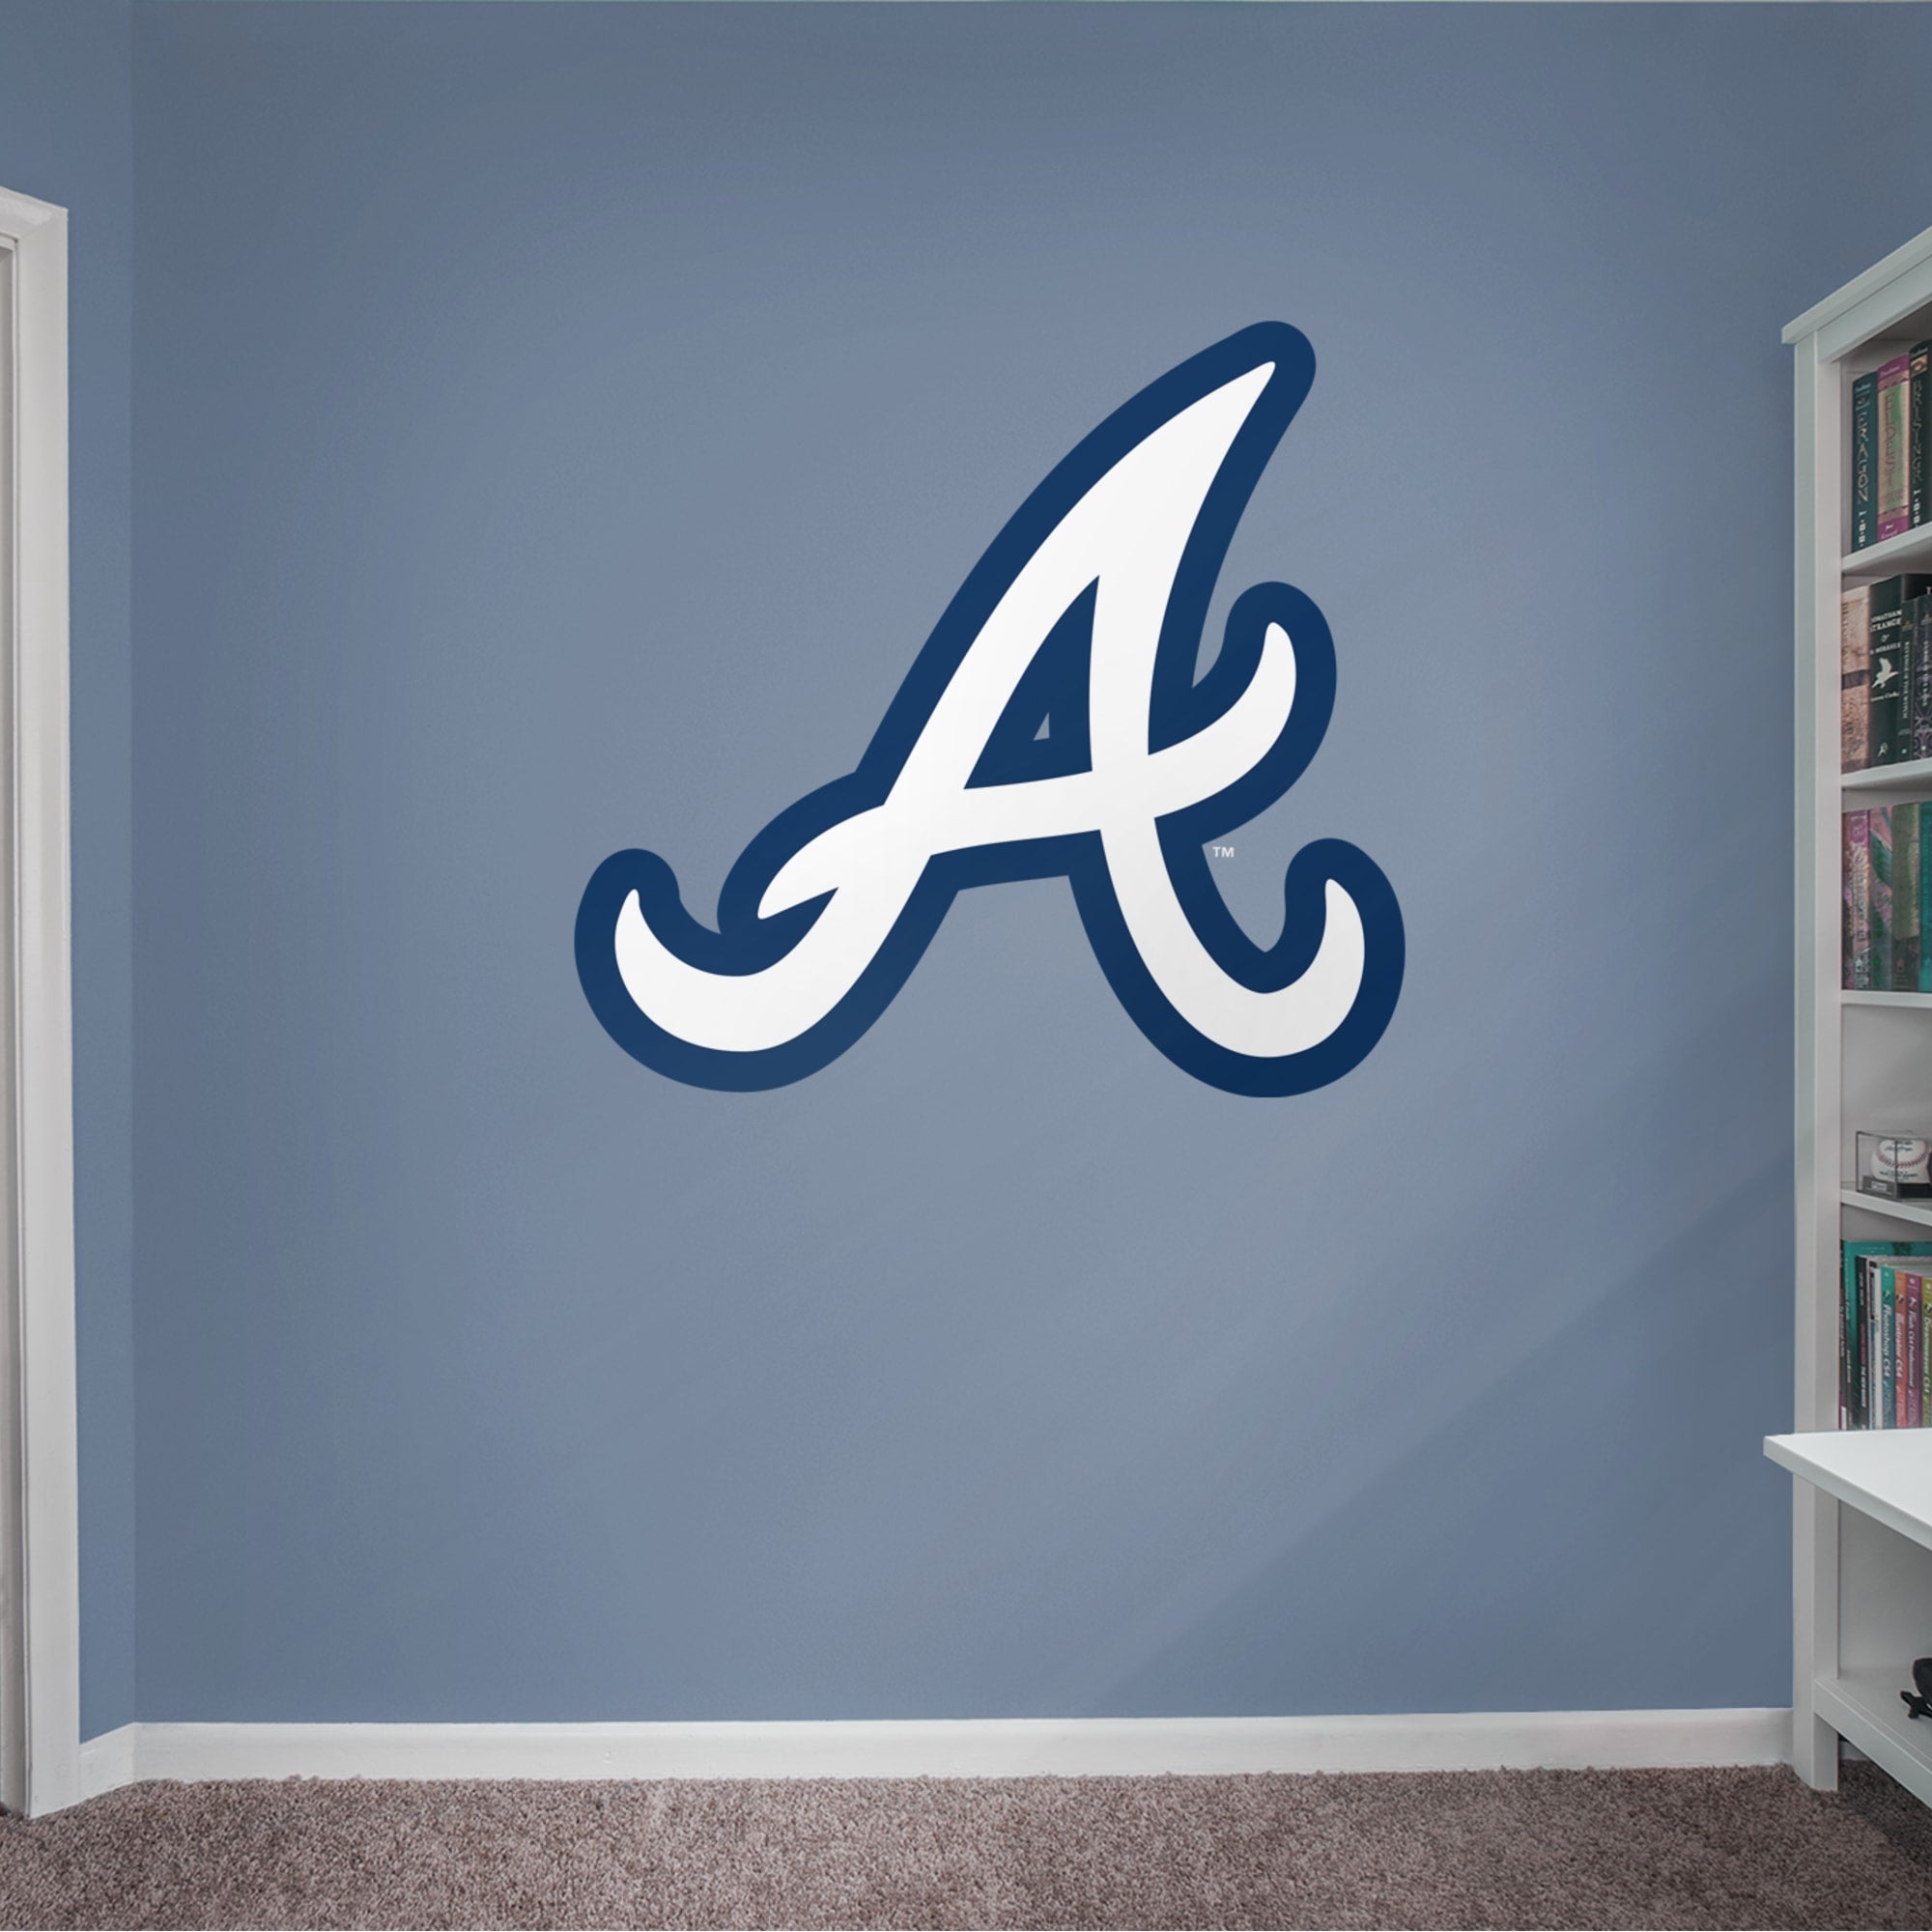 Atlanta Braves: Alternate Logo - Officially Licensed MLB Removable Wall Decal 44.0"W x 42.0"H by Fathead | Vinyl